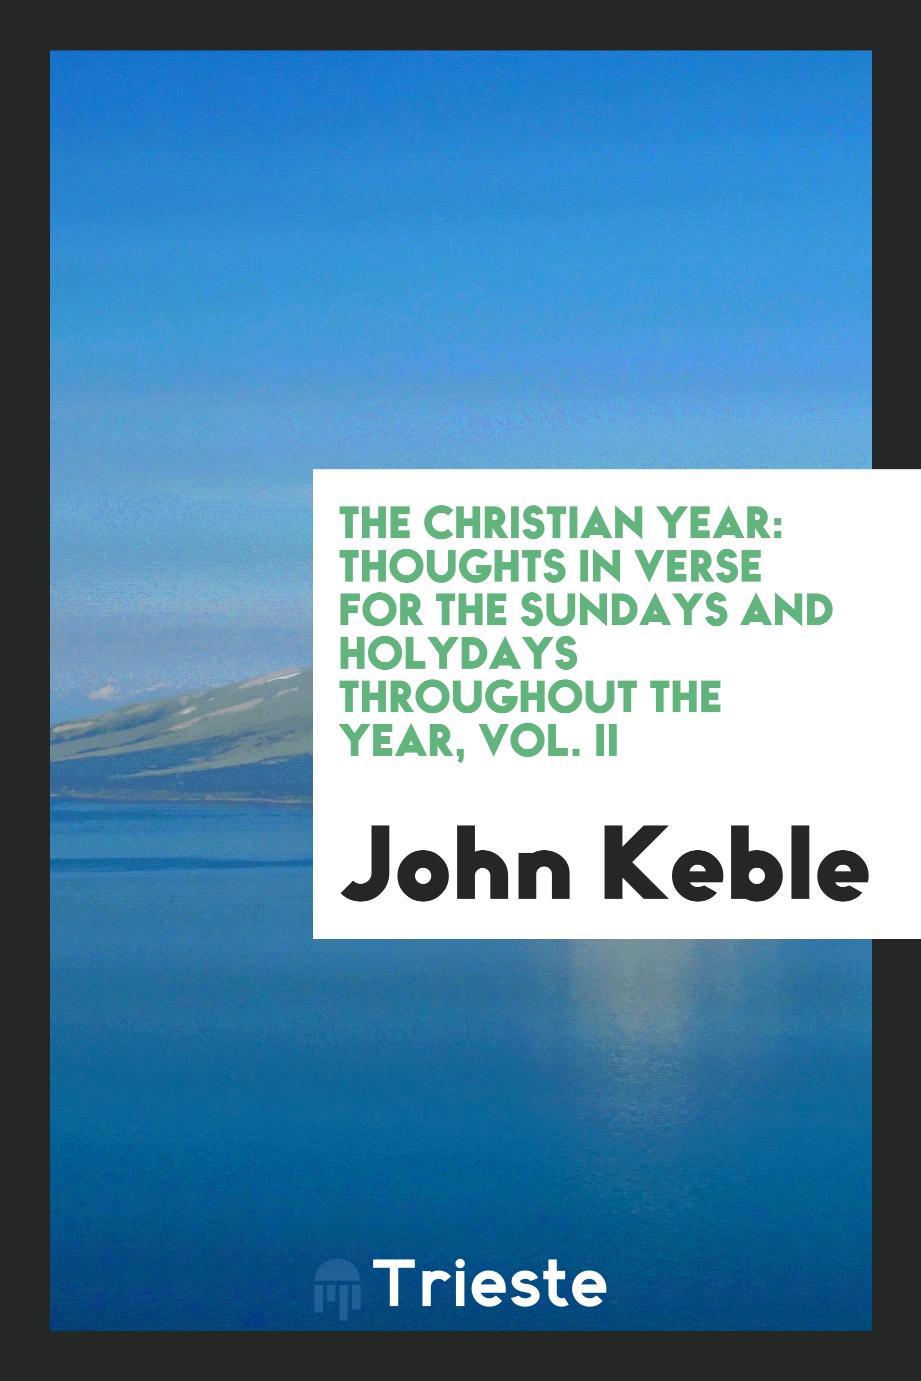 The Christian Year: Thoughts in Verse for the Sundays and Holydays Throughout the Year, Vol. II